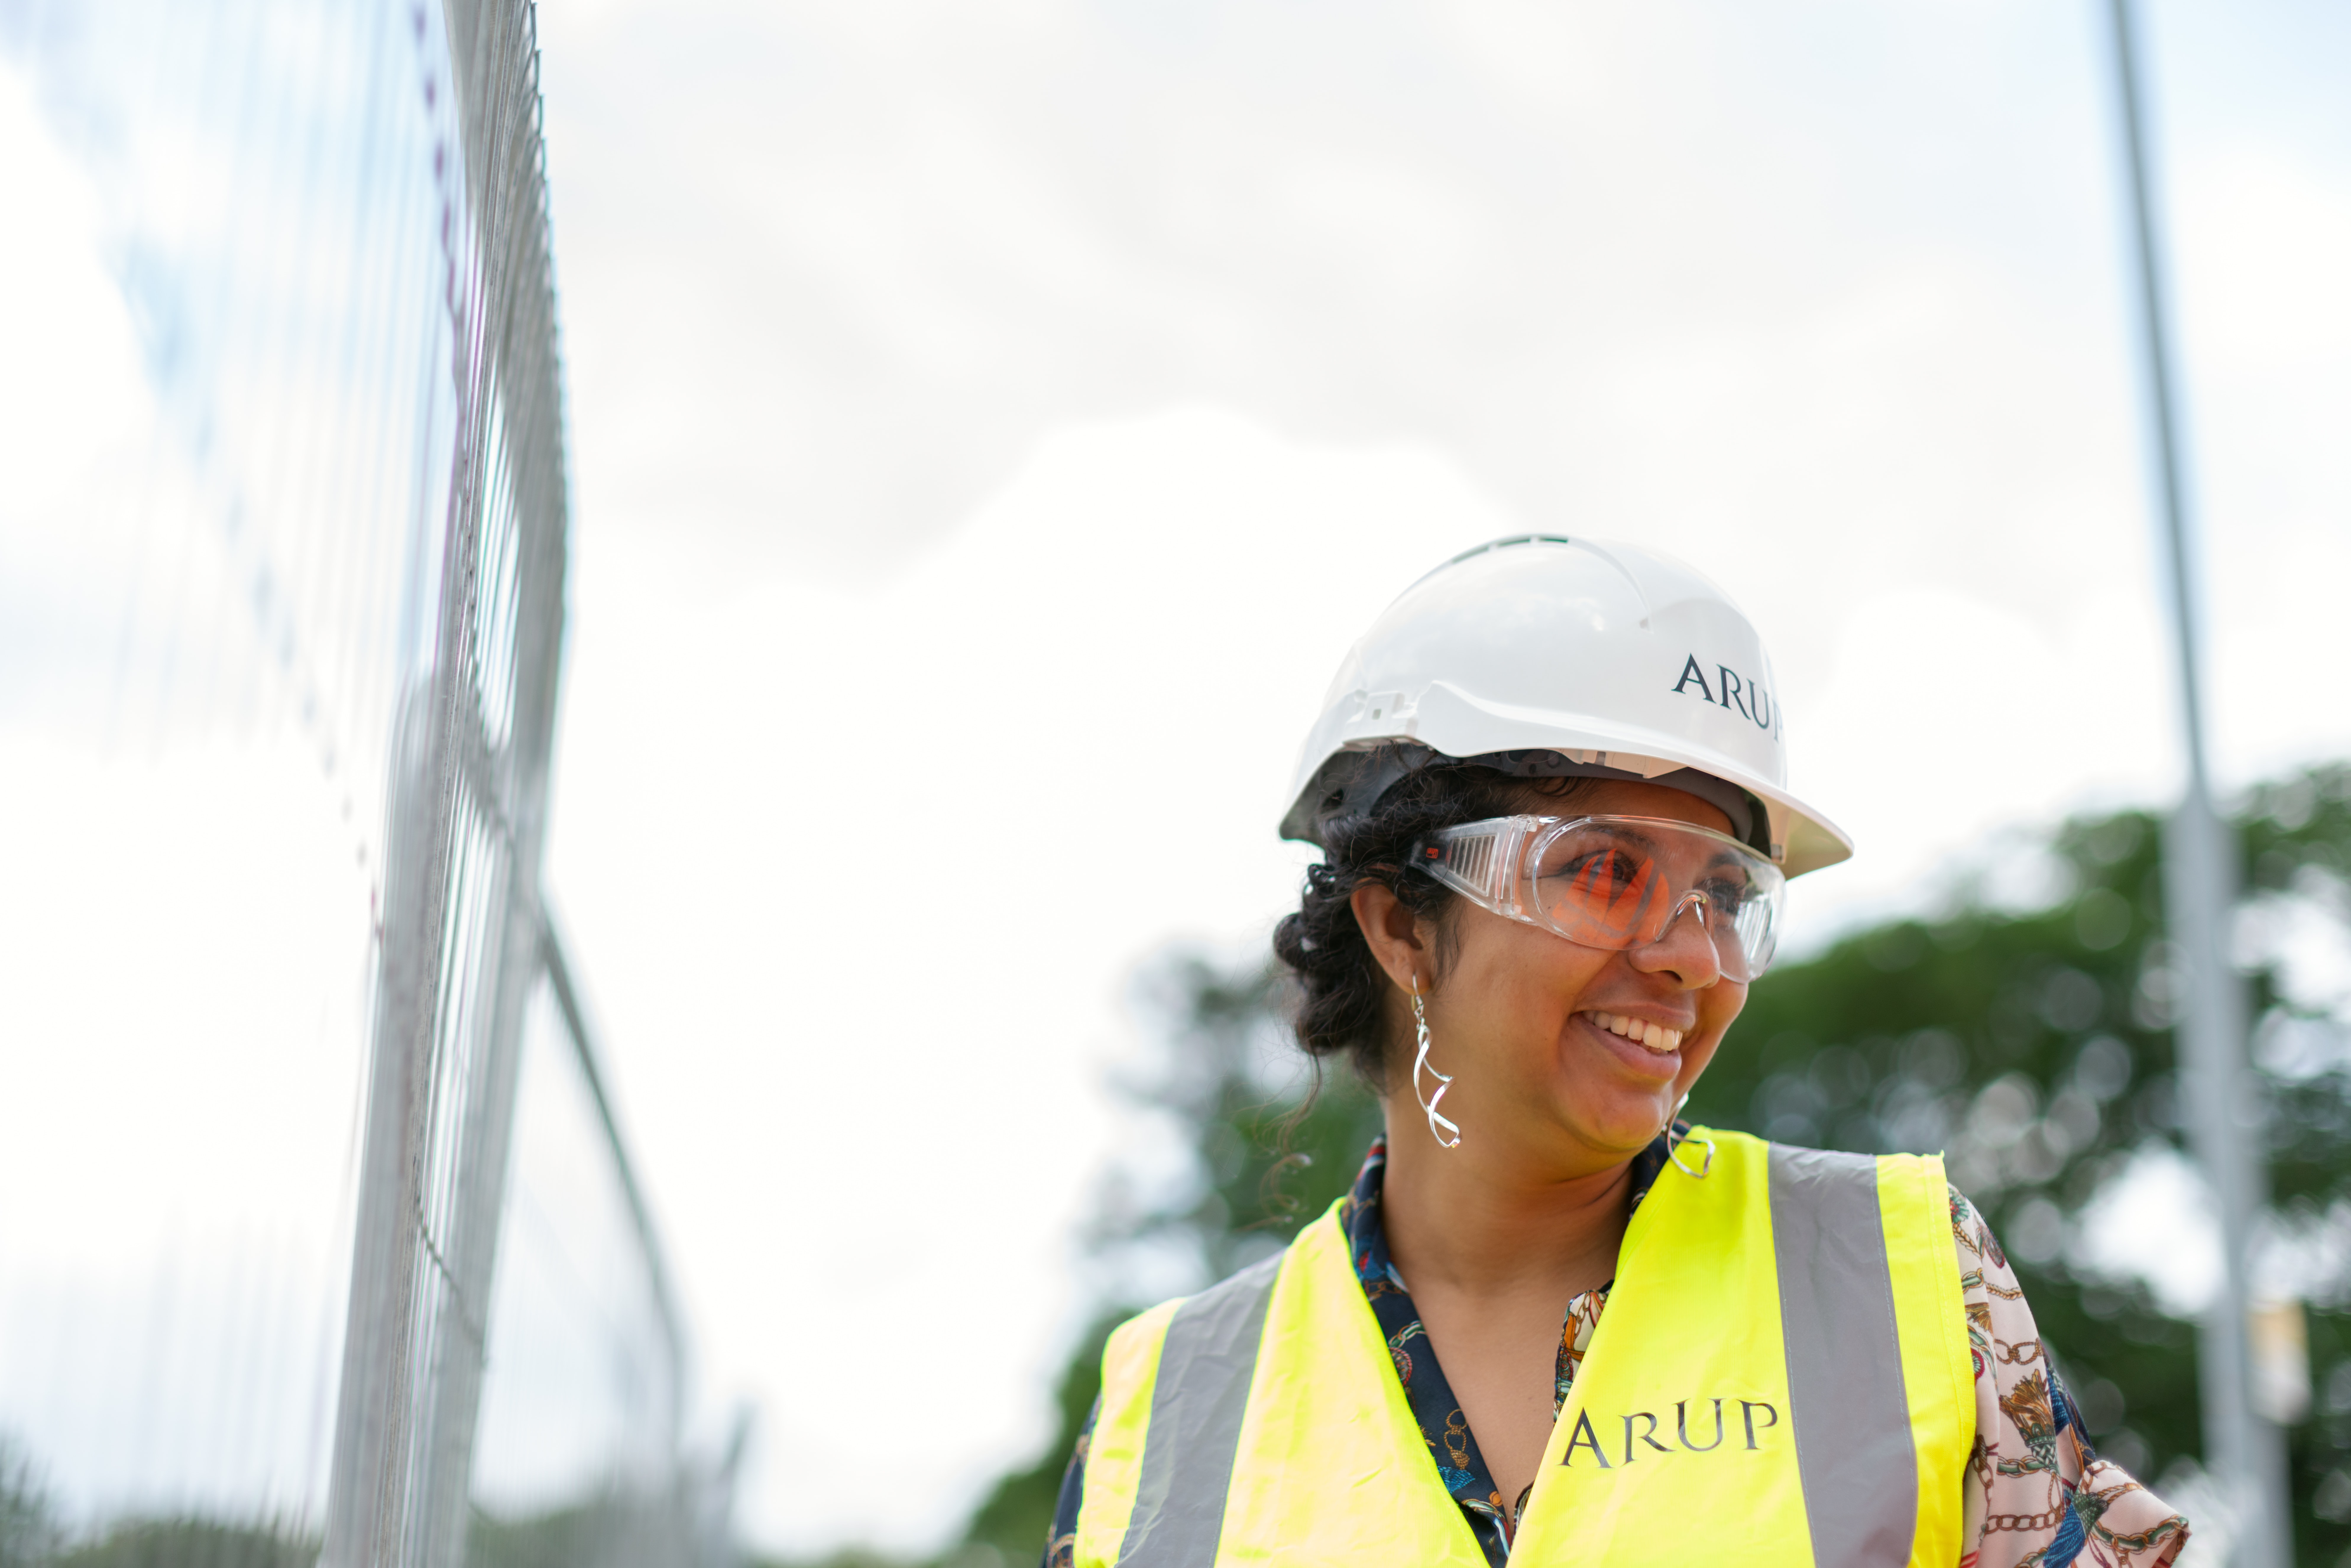 Woman with white hard hat and yellow safety vest on standing in front of scaffolding